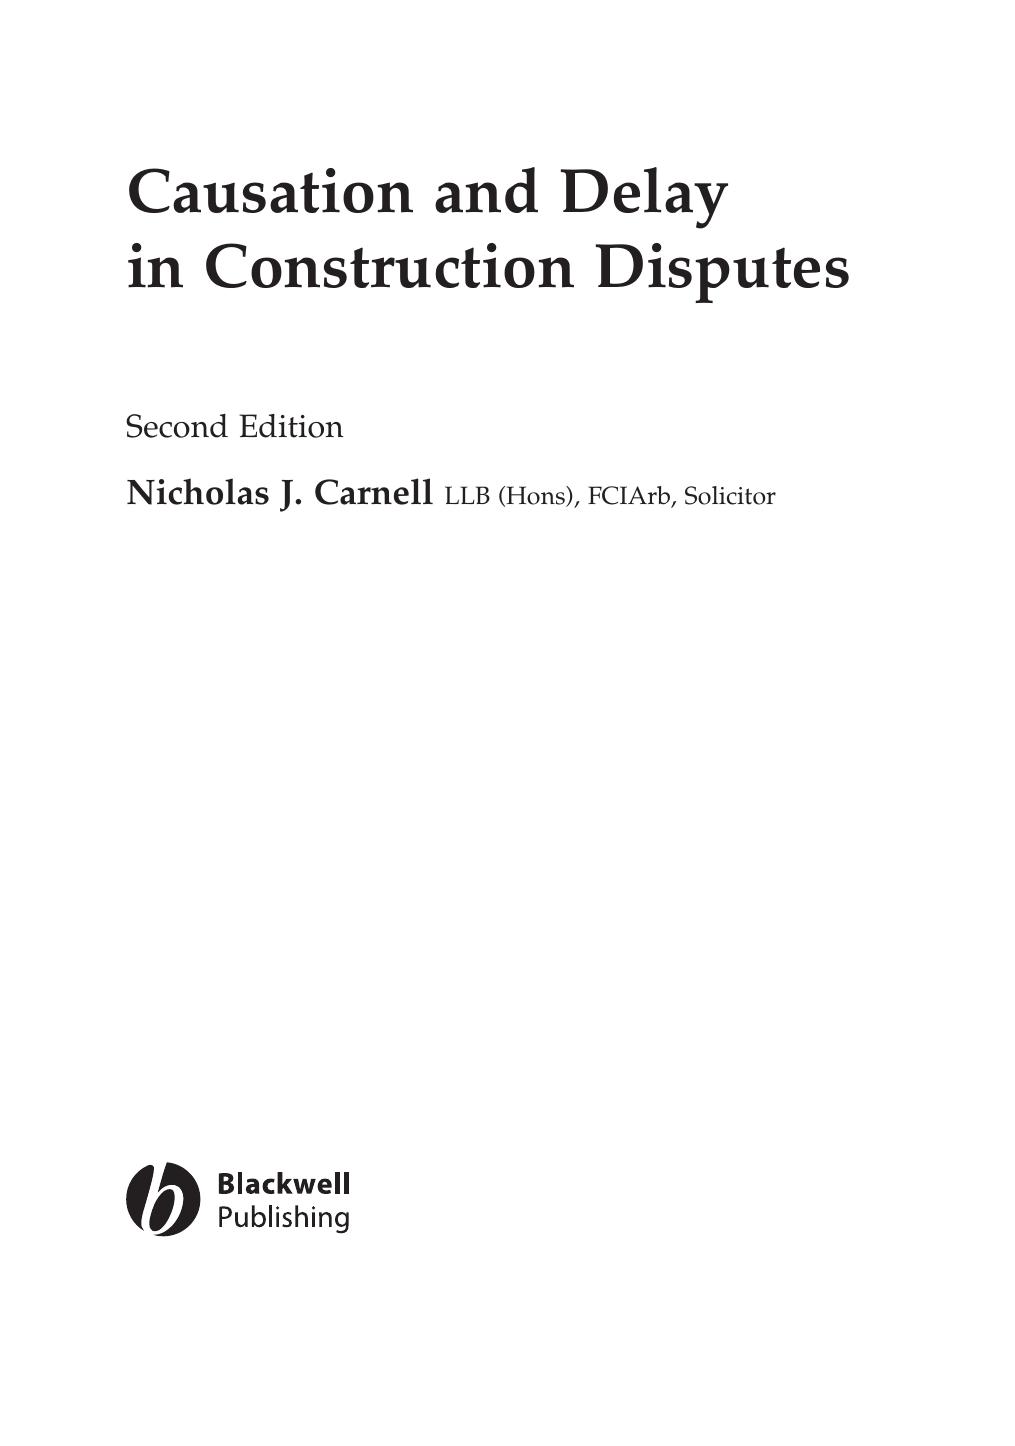 Causation and Delay in Construction Disputes 2005